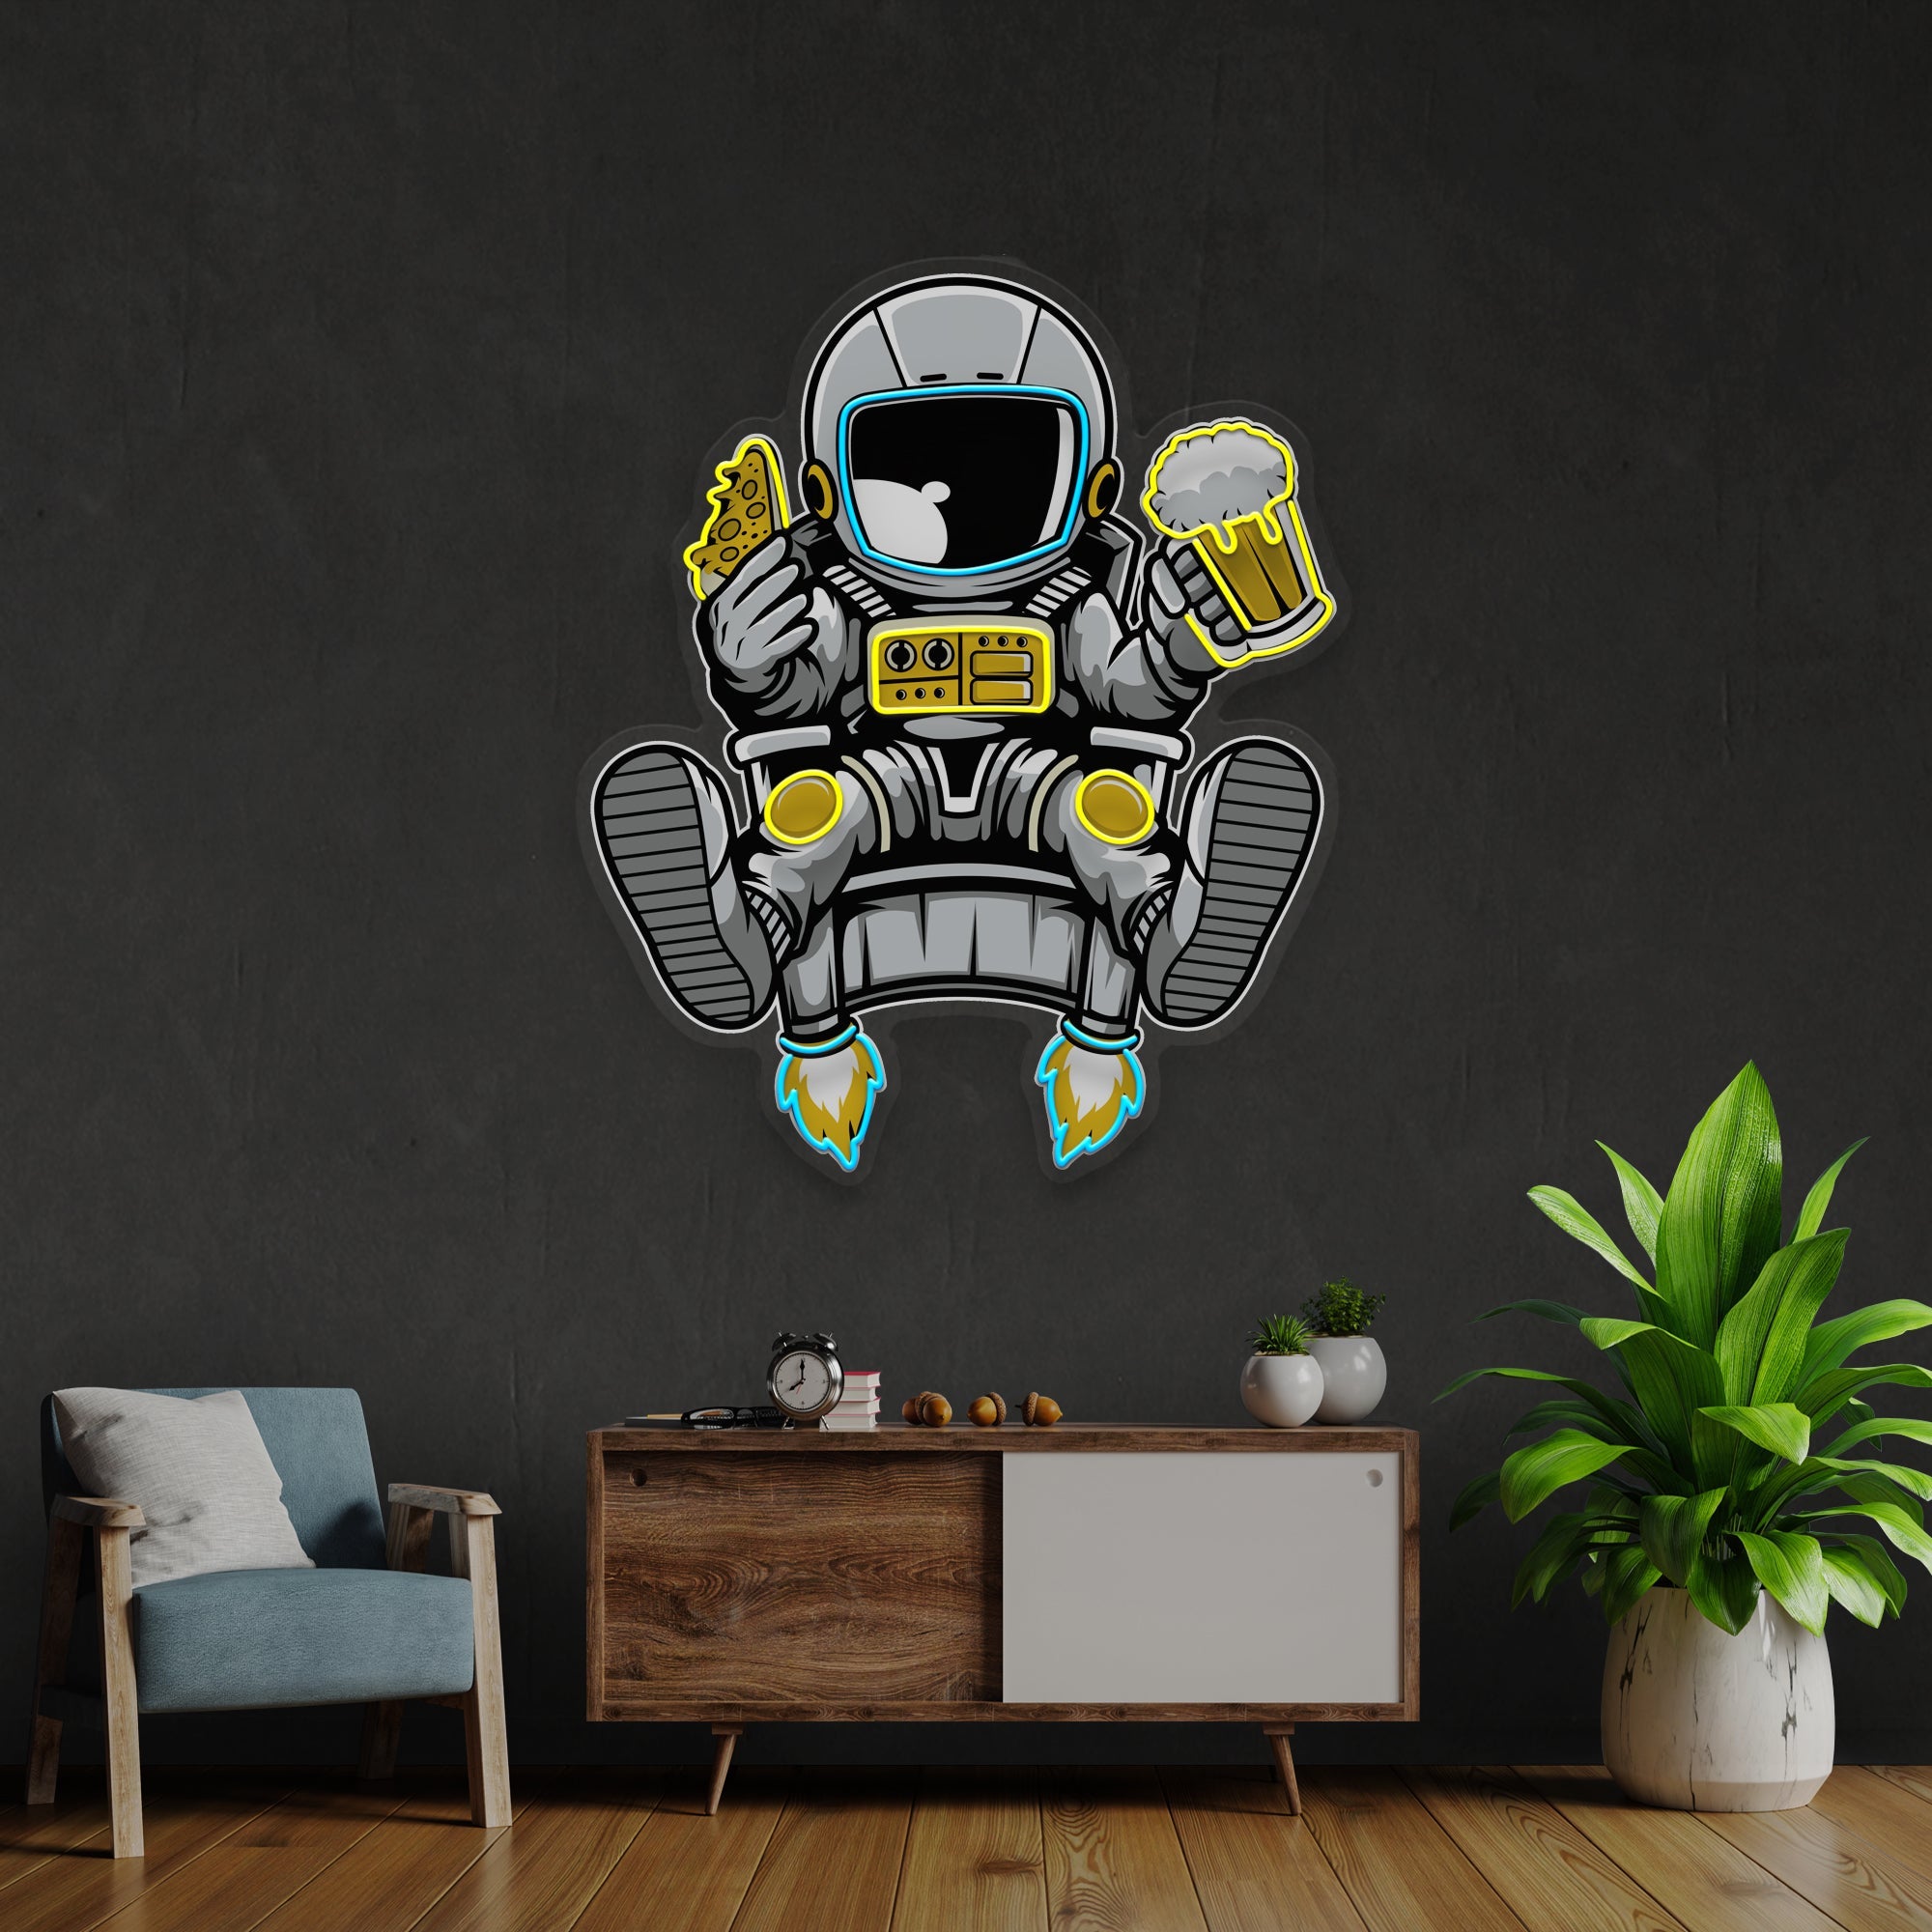 Astronaut Relax With Pizza And Beer Artwork Led Neon Sign Light - Neonbir